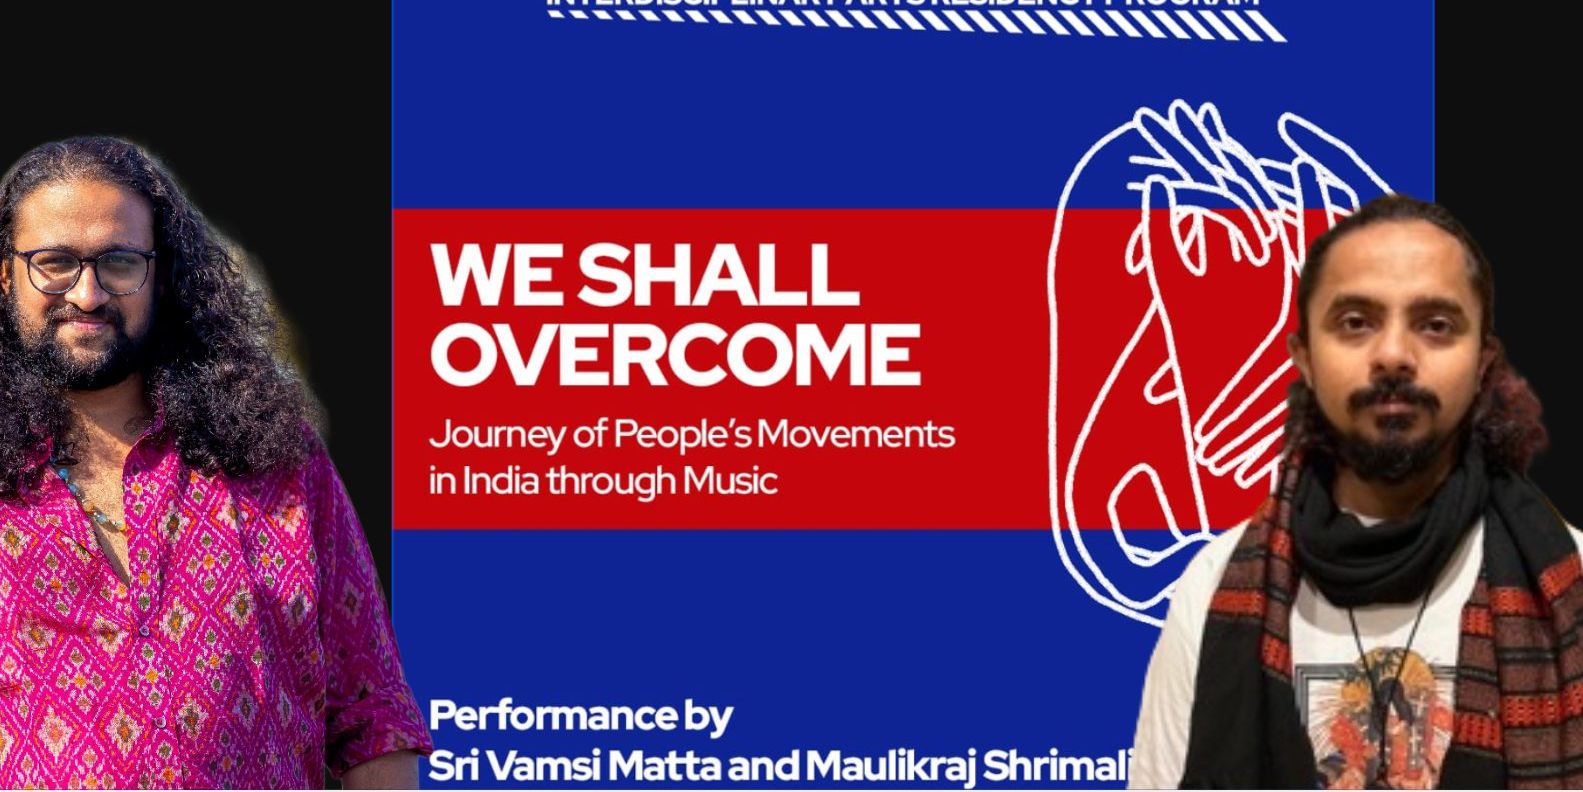 We Shall Overcome: Journey of People’s Movements in India through Music promotional image